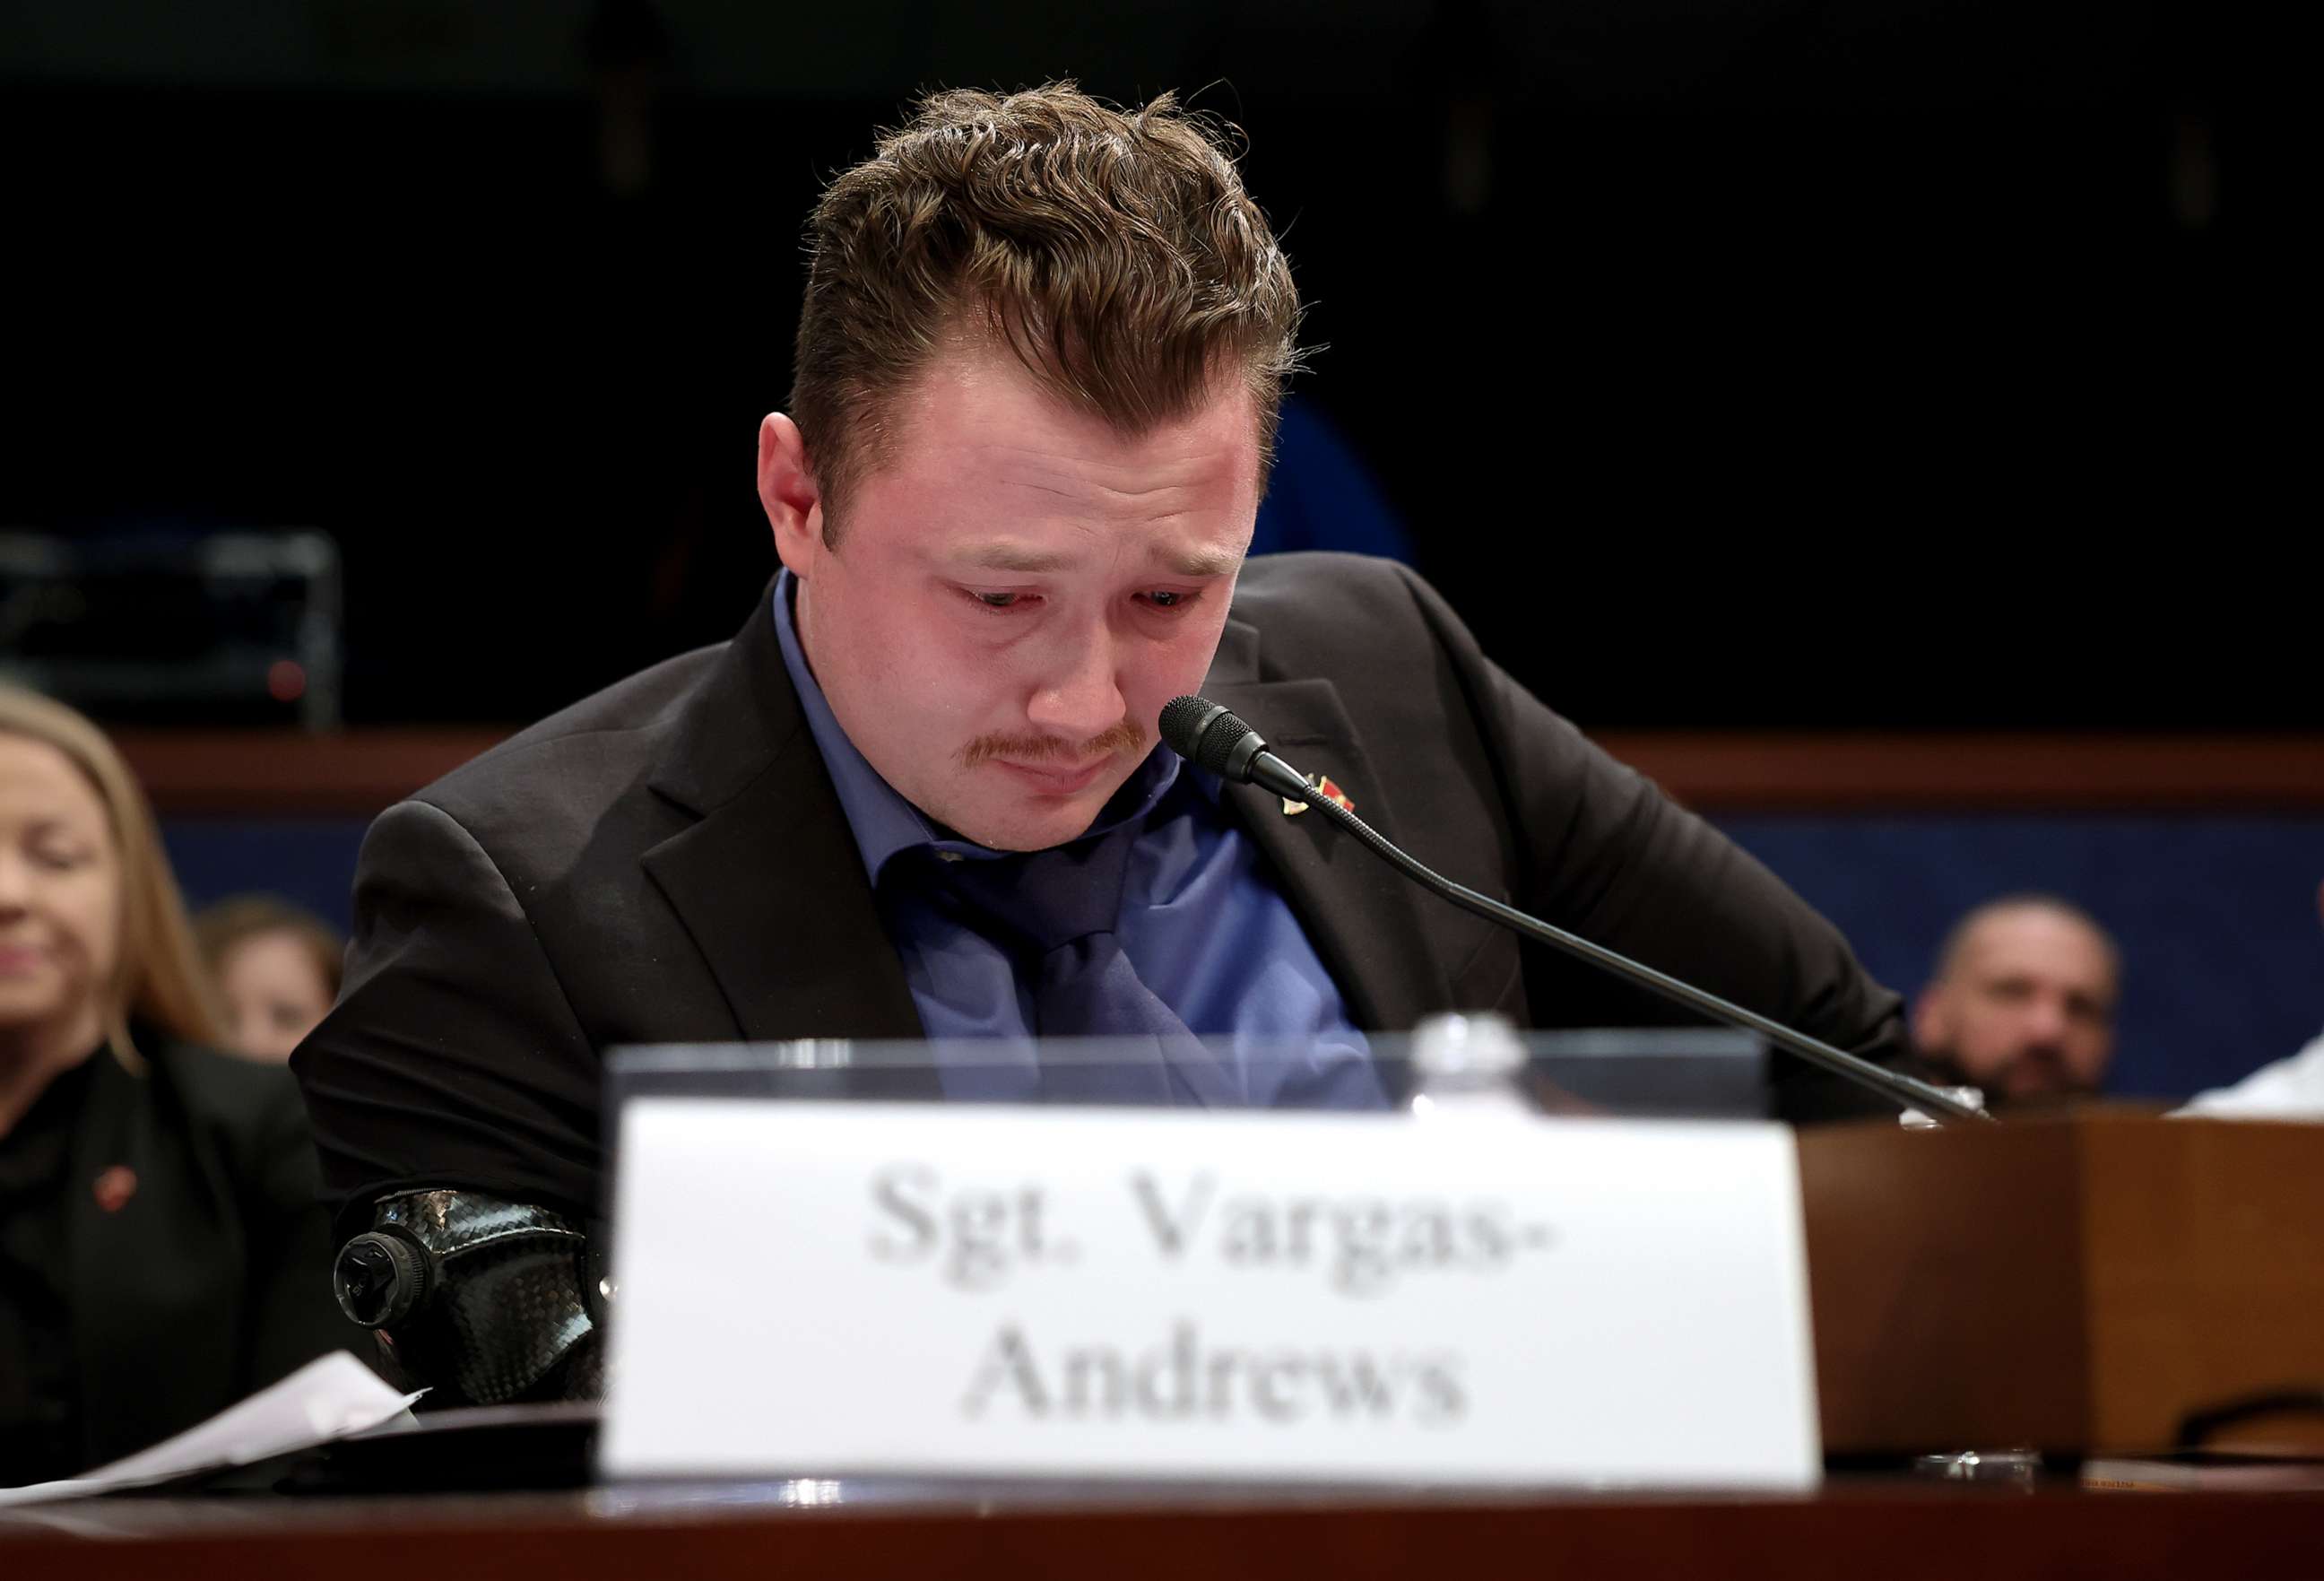 PHOTO: Marine Corps. Sergeant Tyler Vargas-Andrews testifies before the House Foreign Affairs Committee at the U.S. Capitol, March 8, 2023, in Washington, D.C.